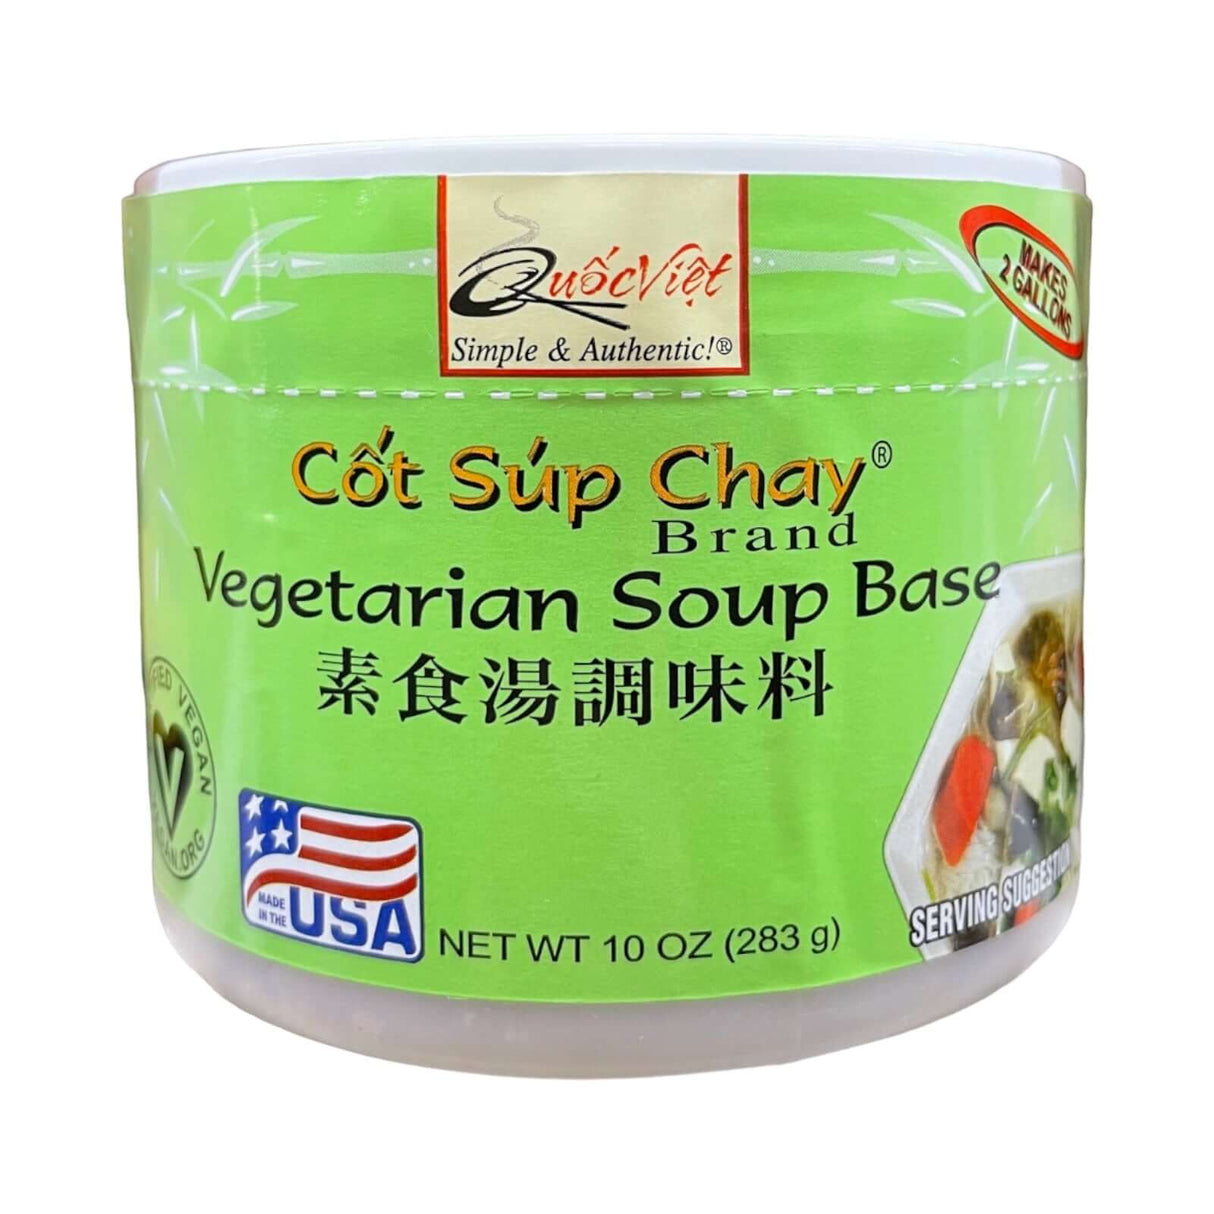 Quoc Viet Foods Vegetarian Soup Base (Cot Sup Chay Brand)